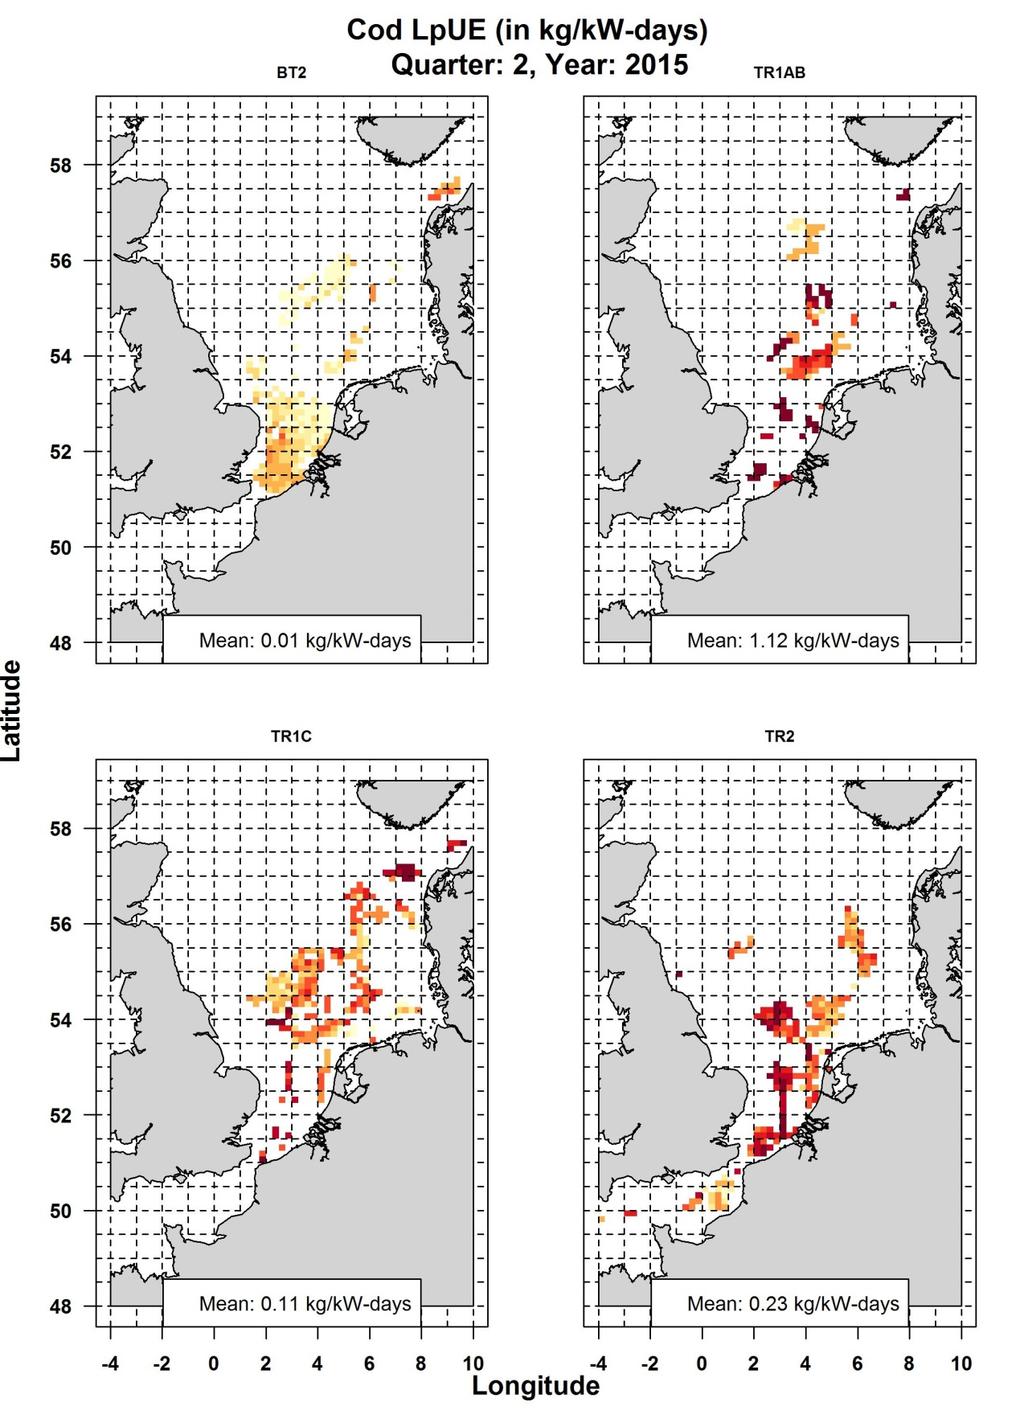 The TR1AB gear had the highest cod LpUE on average (1.12 kg/kw-days) (figure 6, table 2) and high LpUE at almost all areas where fishing was recorded.